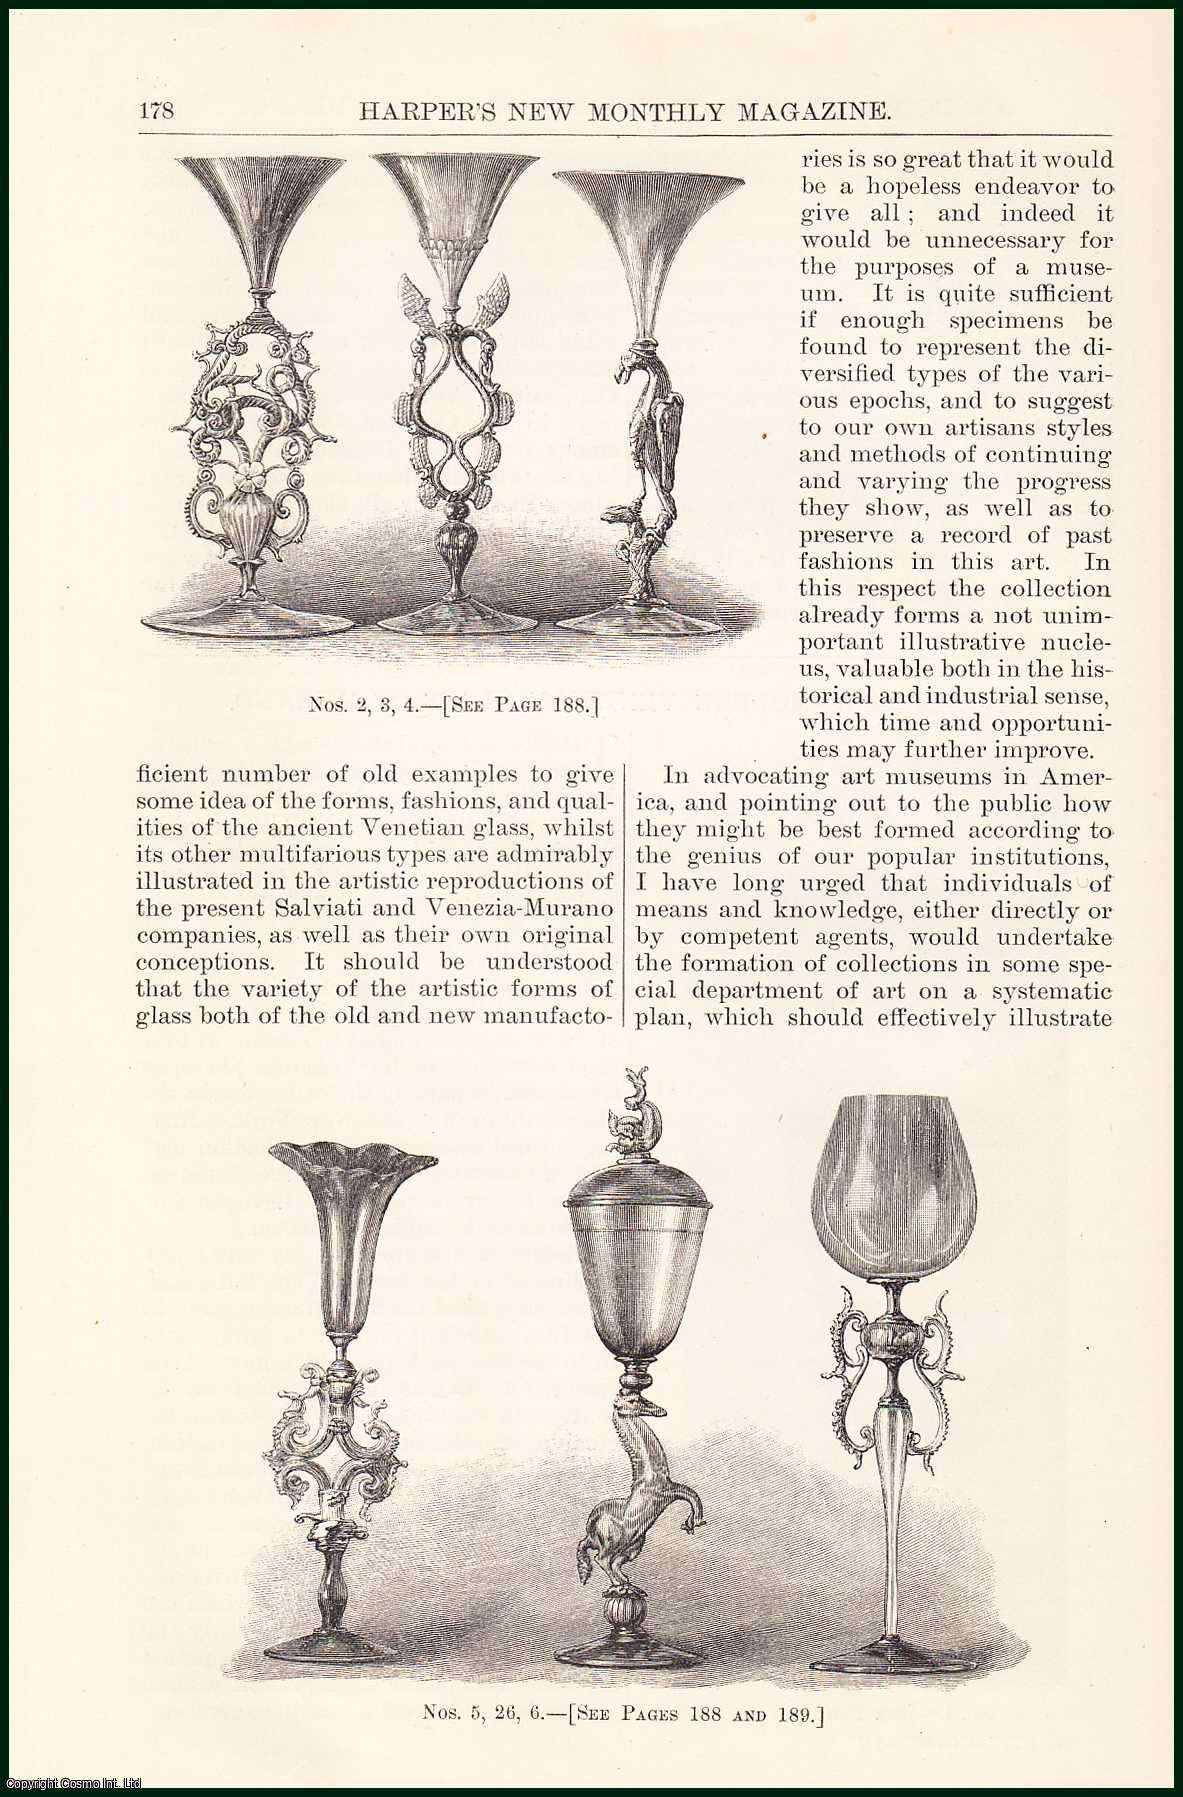 James Jackson Jarves - Ancient & Modern Venetian Glass of Murano. An uncommon original article from the Harper's Monthly Magazine, 1882.